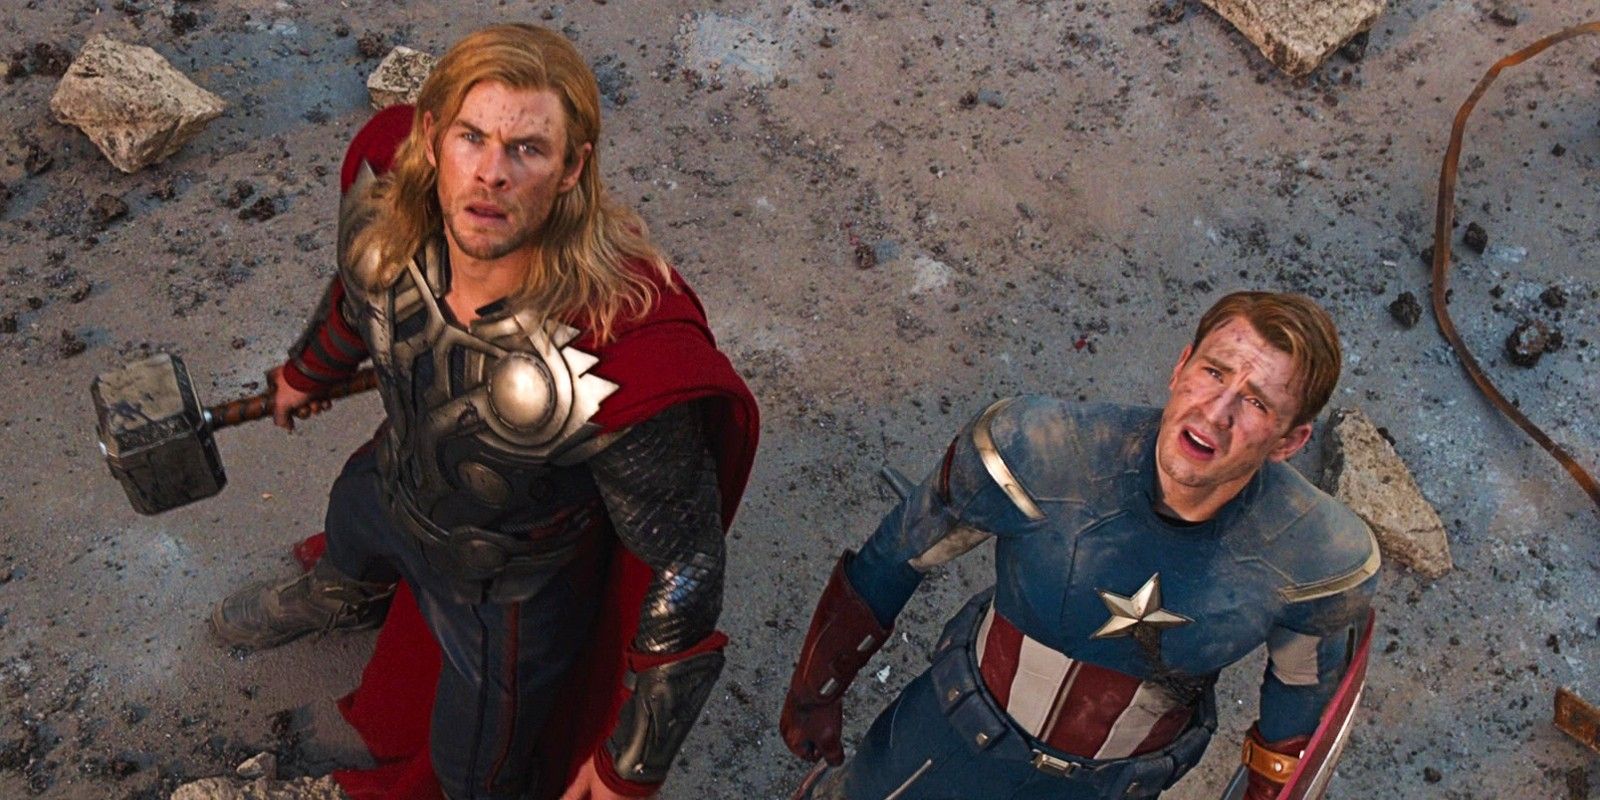 Chris Hemsworth as Thor and Chris Evans as Captain America among the rubble of the Battle of New York in The Avengers